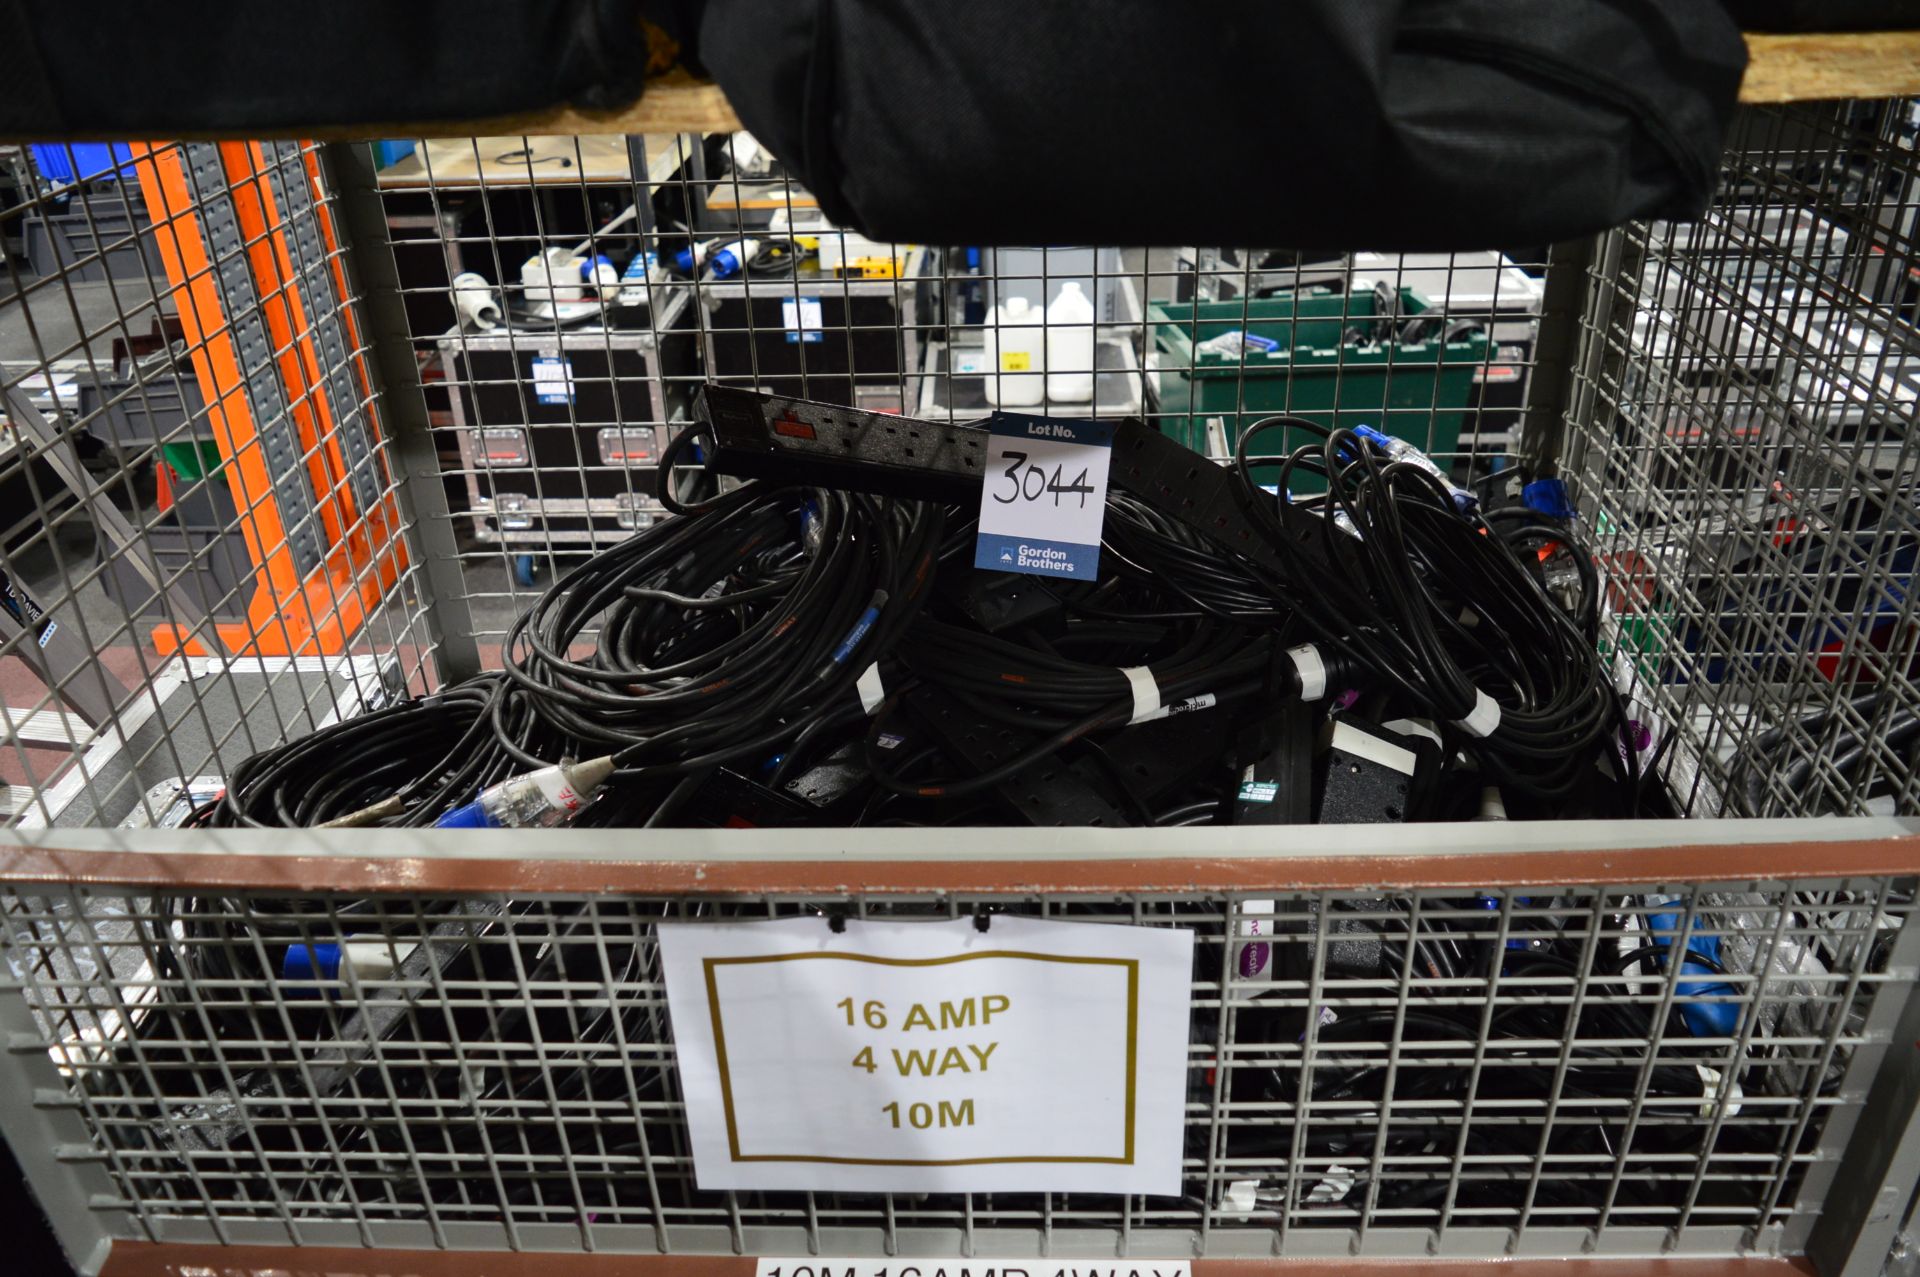 Quantity of 10m 16 amp 4-way extension cables (stillage not included): Unit 500, Eckersall Road,